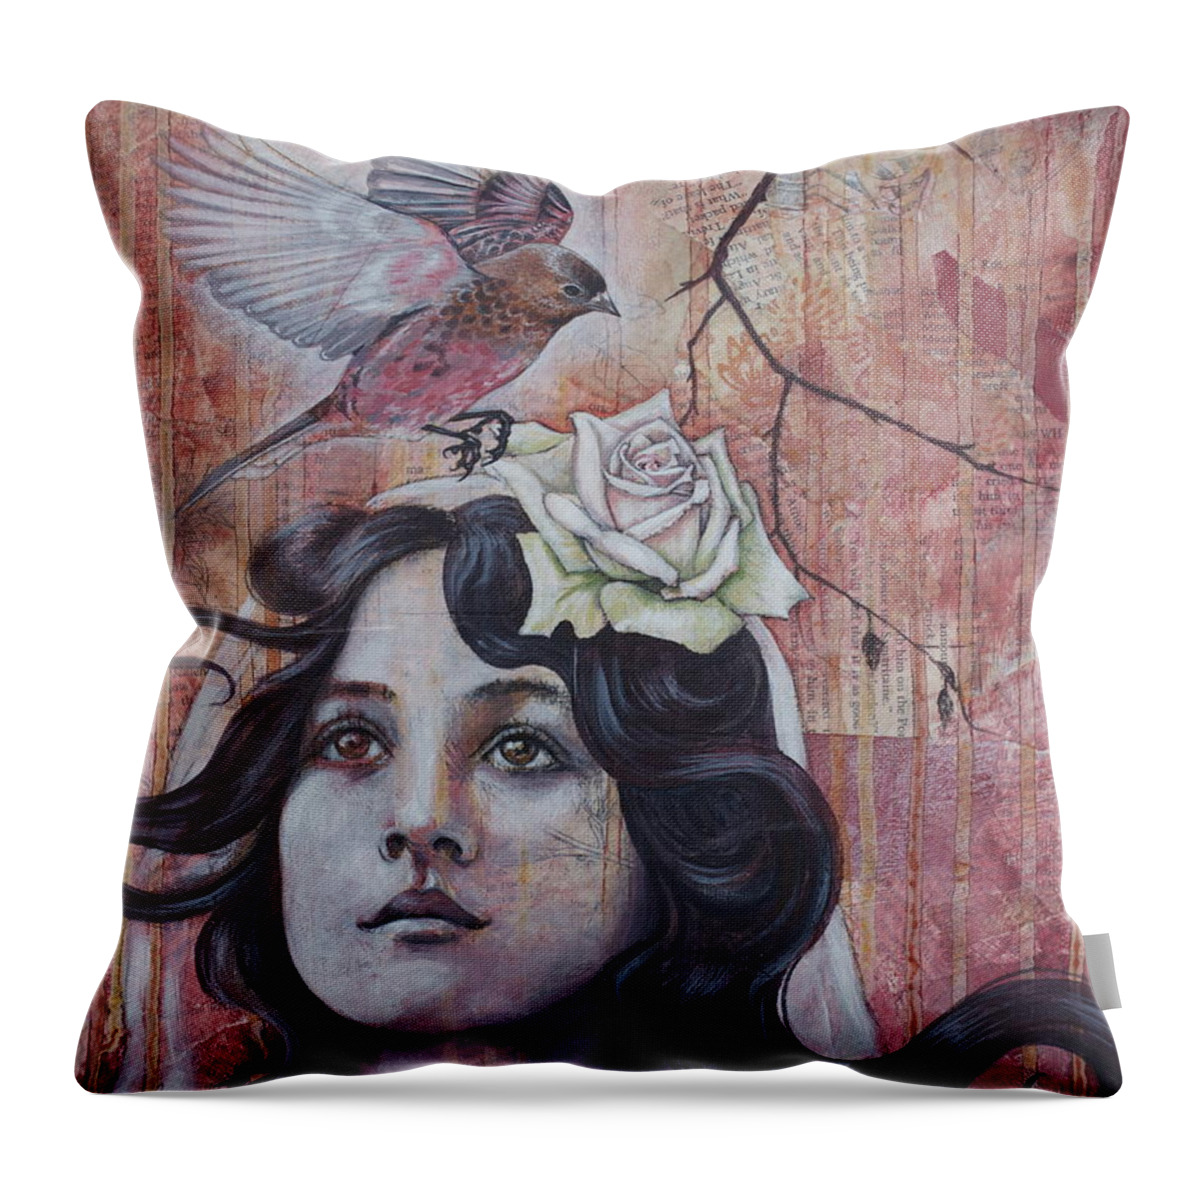 Oracle Throw Pillow featuring the mixed media The Oracle by Sheri Howe